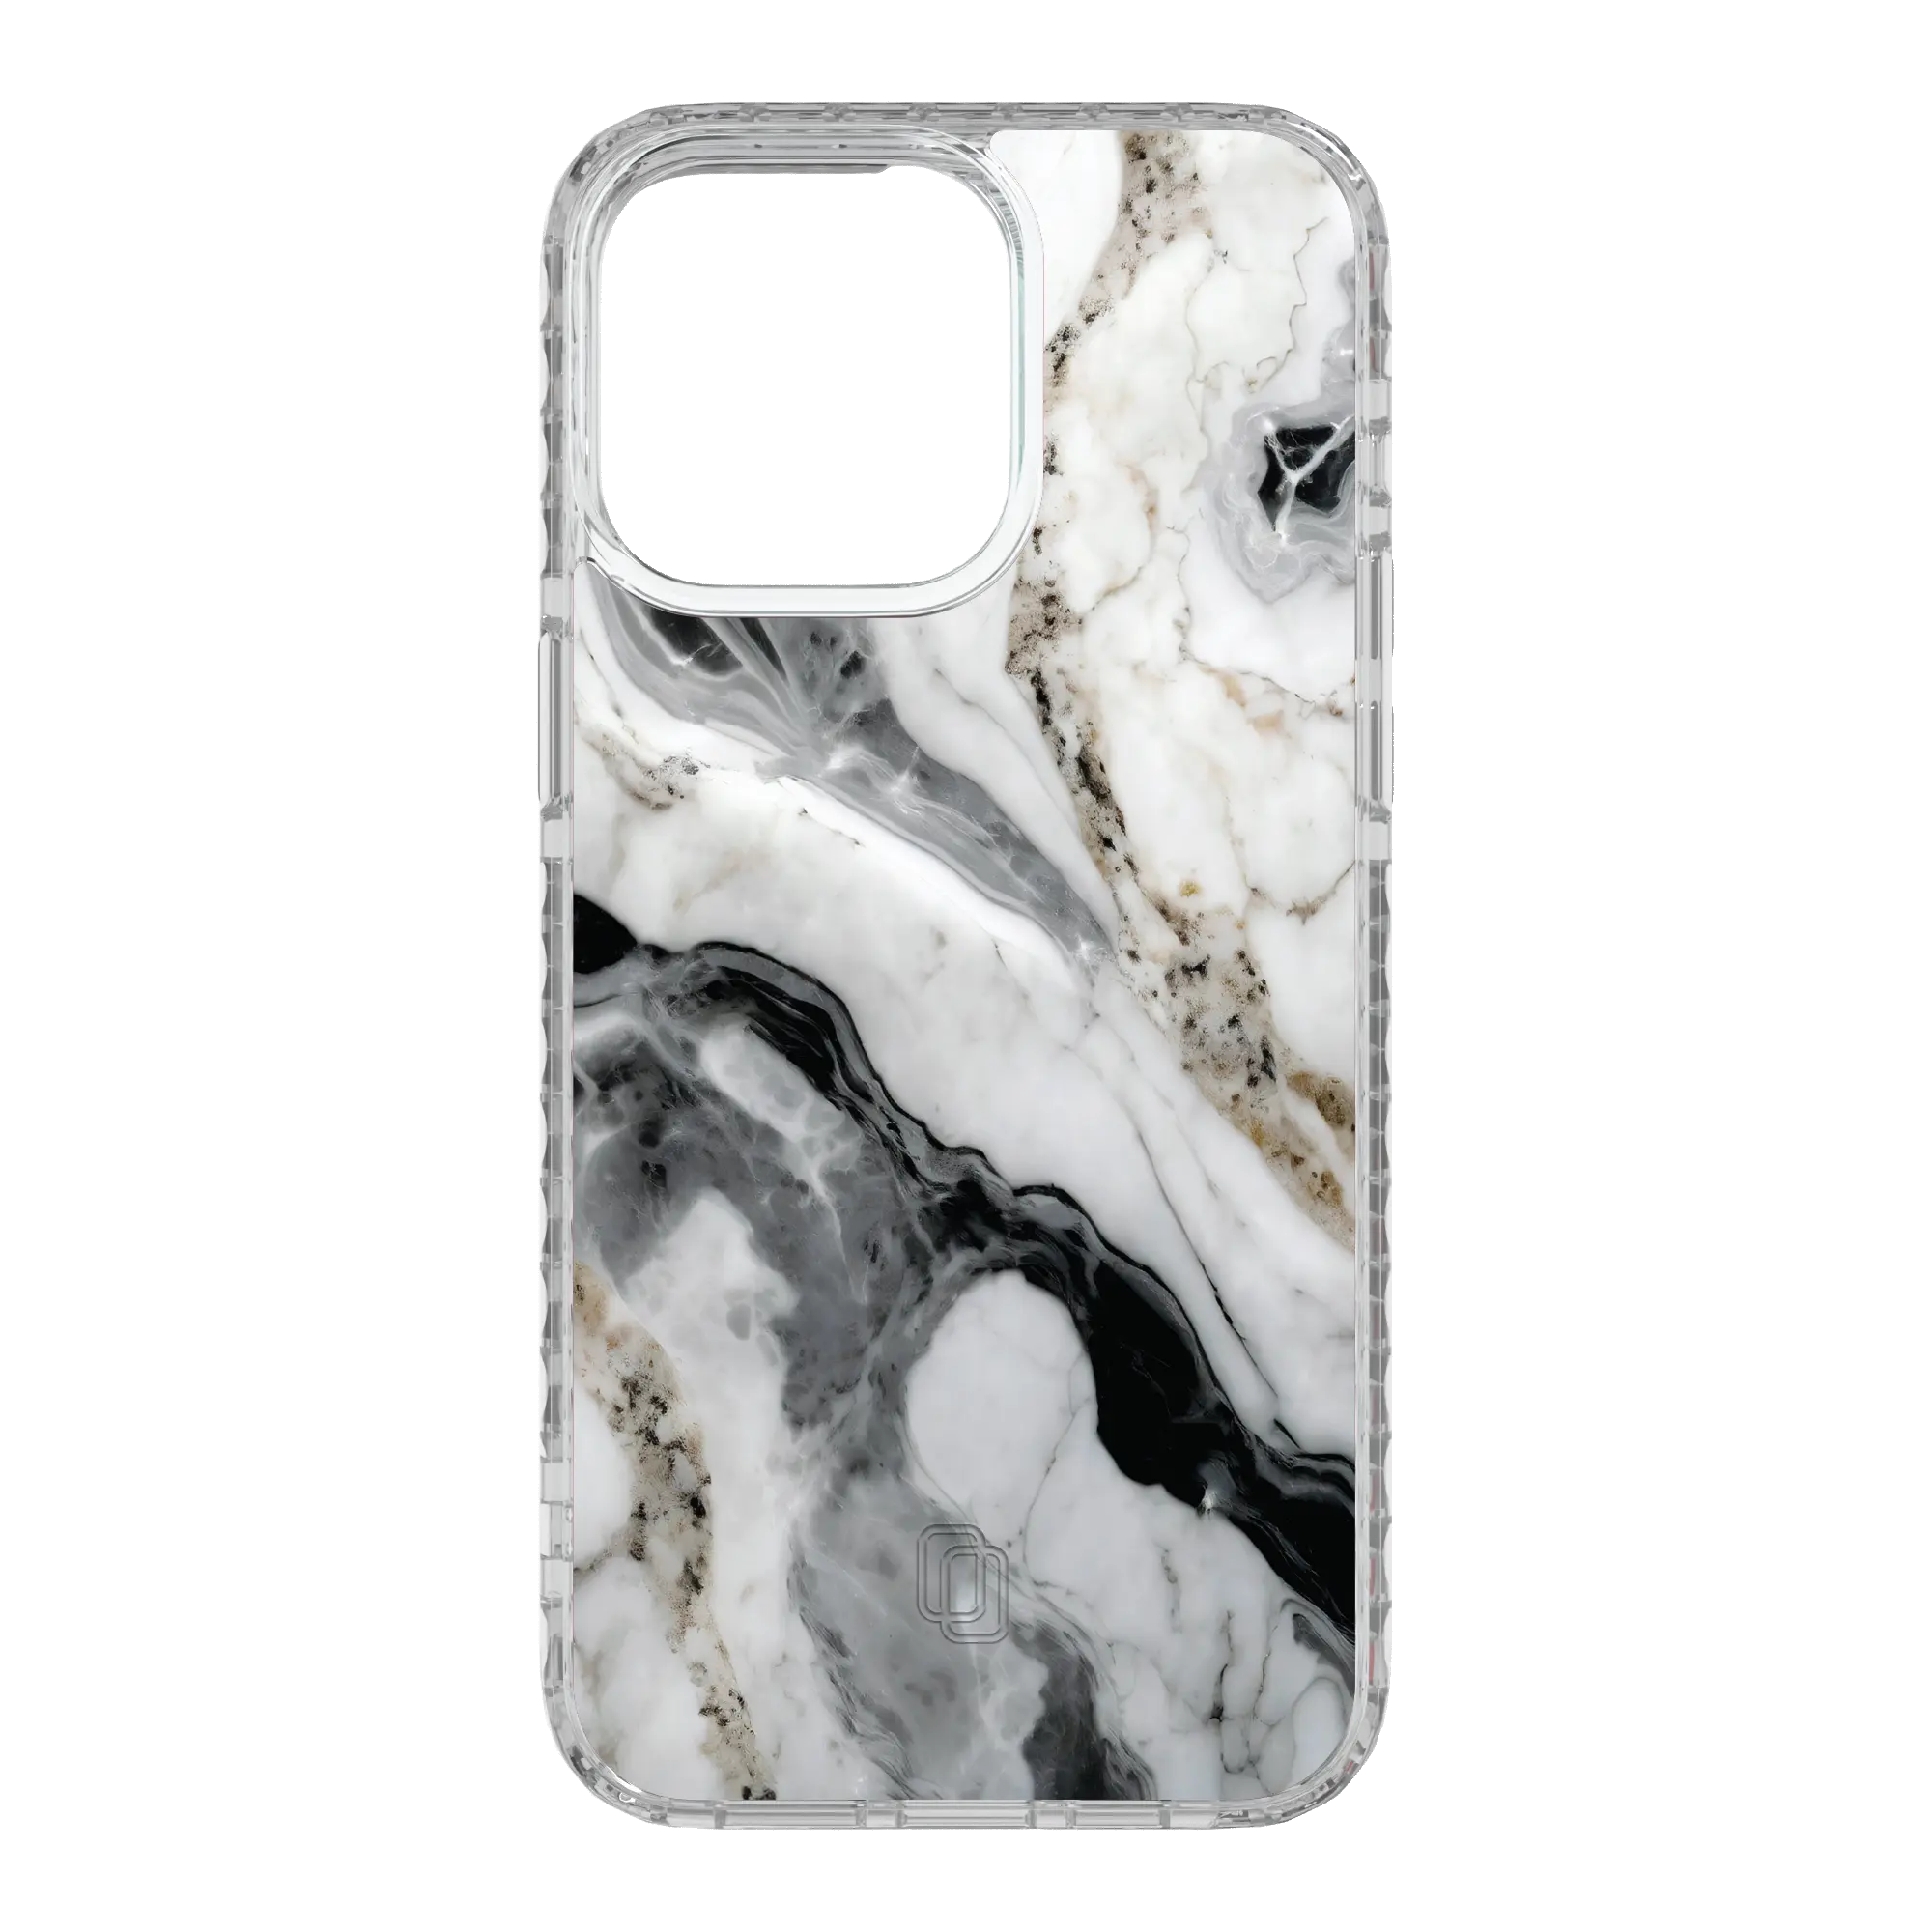 Apple-iPhone-15-Pro-Max-Crystal-Clear Pure Snow | Protective MagSafe White Marble Case | Marble Stone Collection for Apple iPhone 15 Series cellhelmet cellhelmet